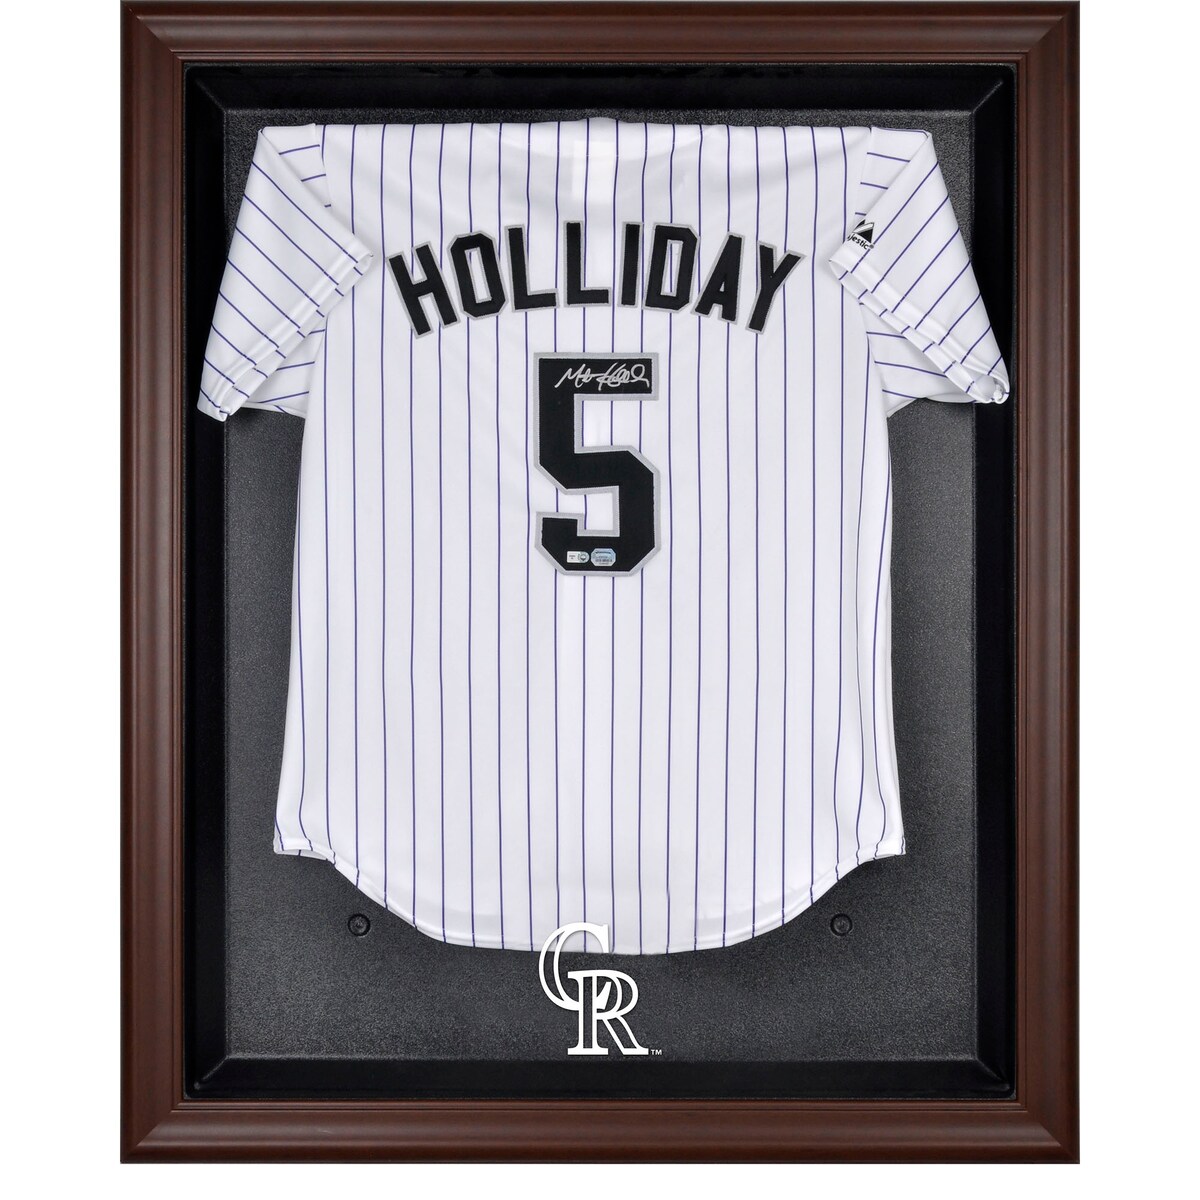 The Colorado Rockies brown framed logo jersey display case opens on hinges and is easily wall-mounted. It comes with a 24" clear acrylic rod to display a collectible jersey. It comes constructed with a durable, high-strength injection mold backing, encased by a beautiful wood frame and an engraved team logo on the front. Officially licensed by Major League Baseball. The inner dimensions of the case are 38" x 29 1/2"x 3" with the outer measurements of 42" x 34 1/2" x 3 1/2". Memorabilia sold separately.Easily wall mountedHinges to open easilyHas a LogoOfficially licensed MLB productMemorabilia sold separatelyWood frameOfficially licensedIncludes acrylic rod to hold jerseyImportedMade in the U.S.A.Brand: Fanatics AuthenticEngraved team graphicsCollectible jersey display case